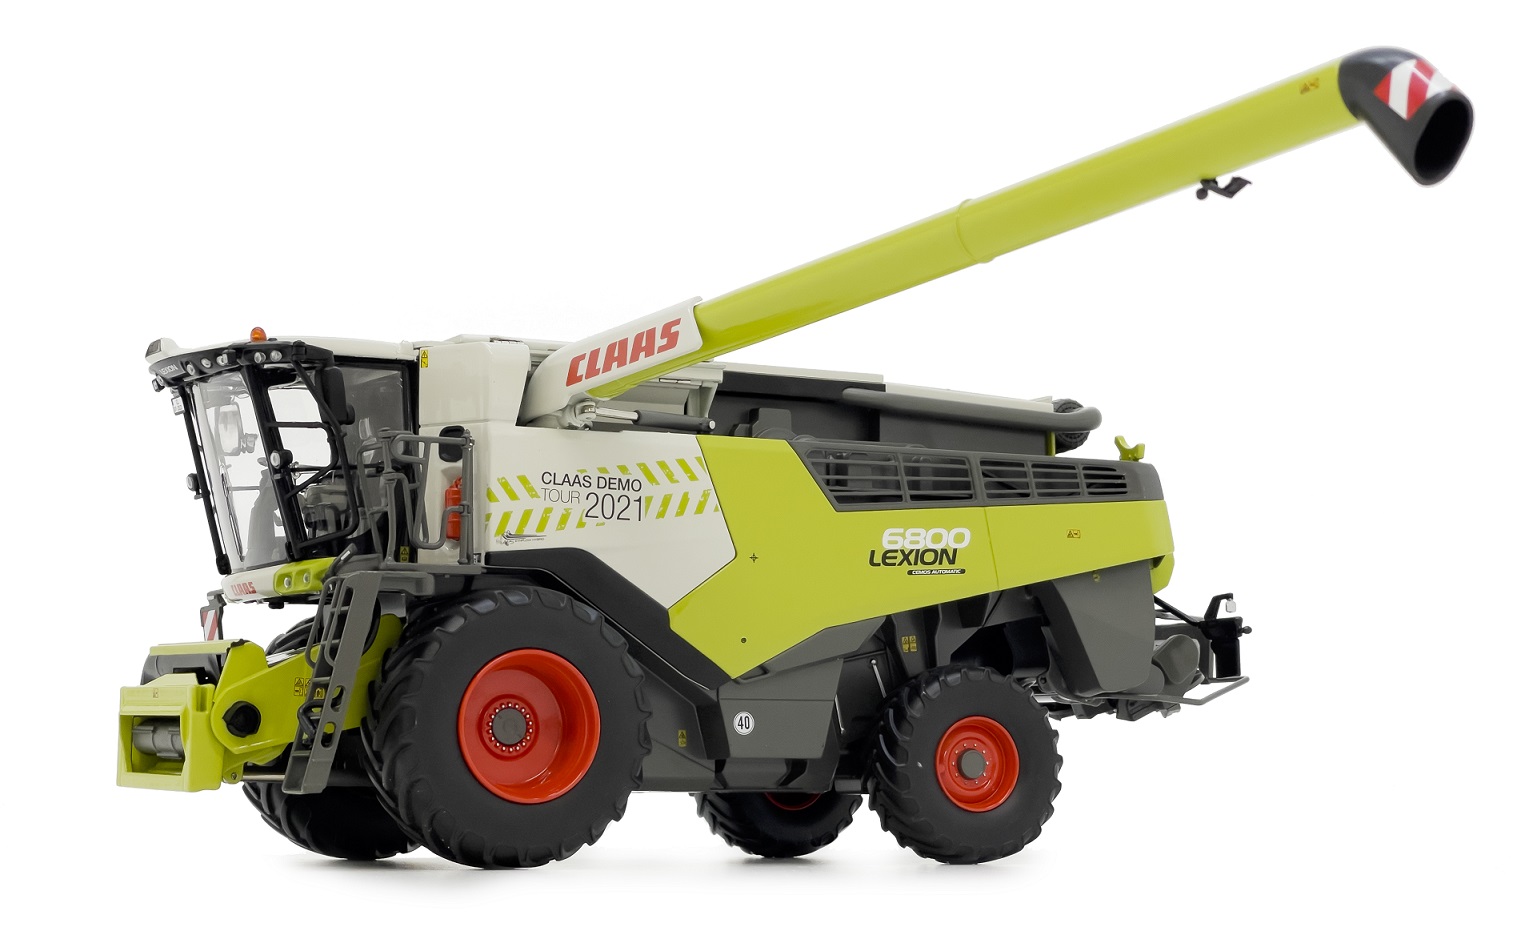 Claas Lexion 6800 Demo Tour 2021 Limited Edition 250 pieces - 1:32